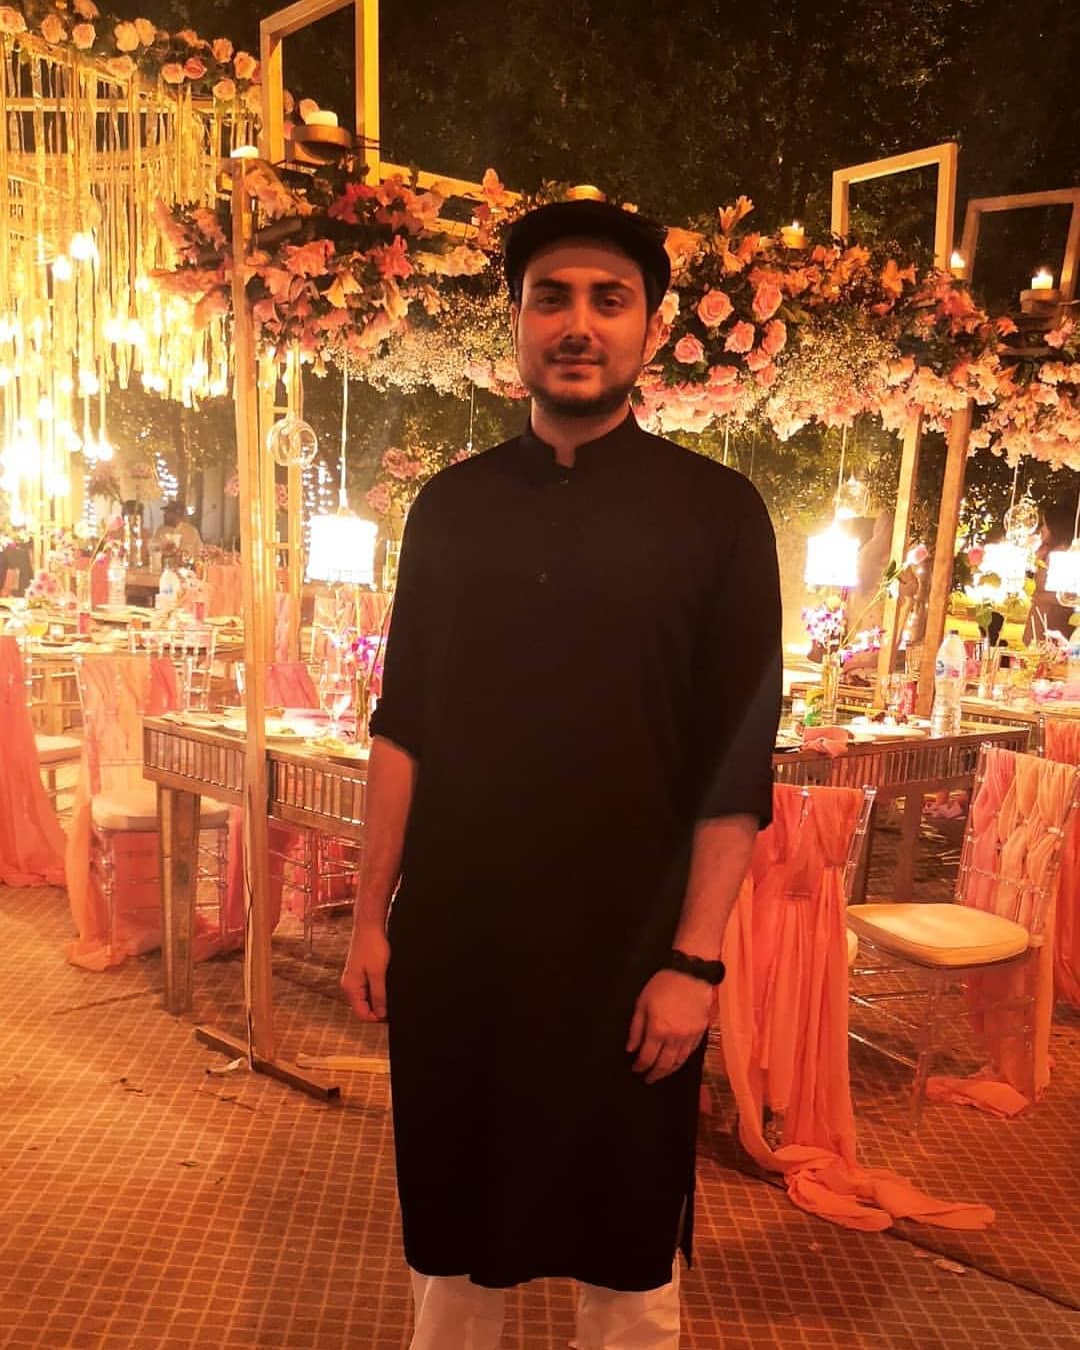 Celebrities Spotted at a Wedding Event in Islamabad